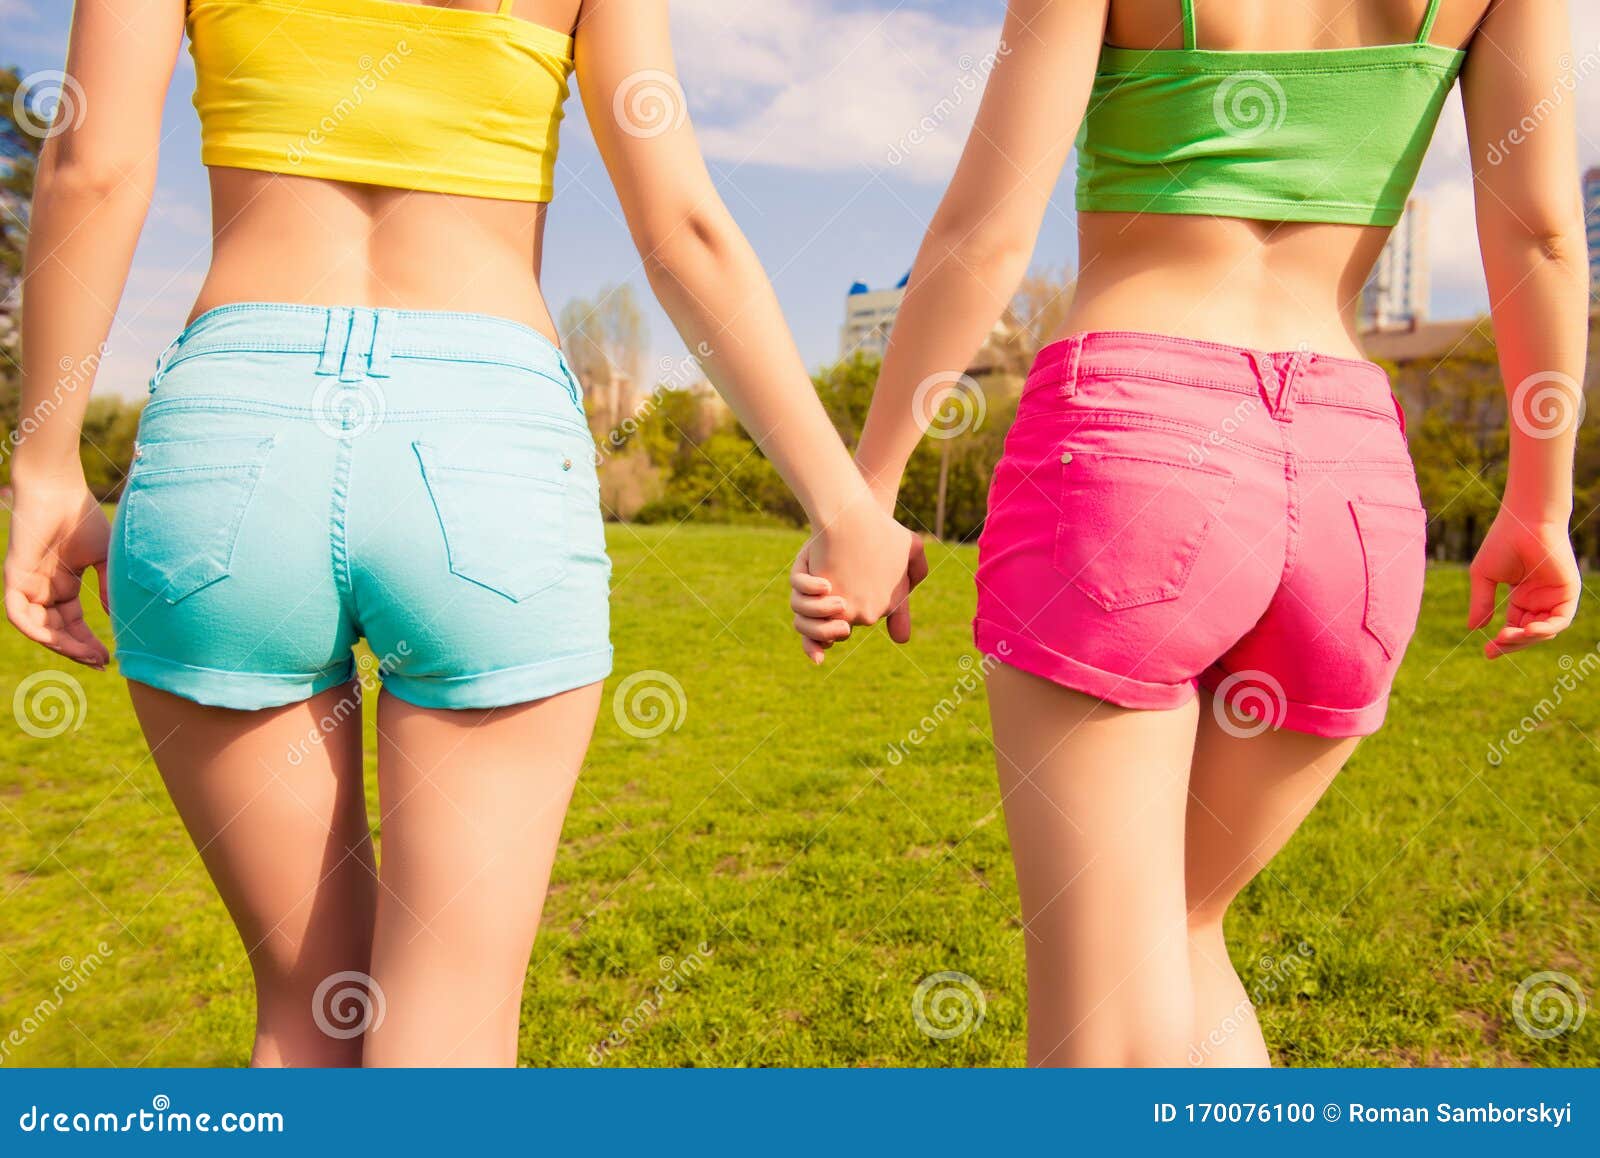 close-up-photo-shapely-woman-s-buttocks-color-shorts-close-up-photo-shapely-woman-s-buttocks-color-shorts-170076100.jpg